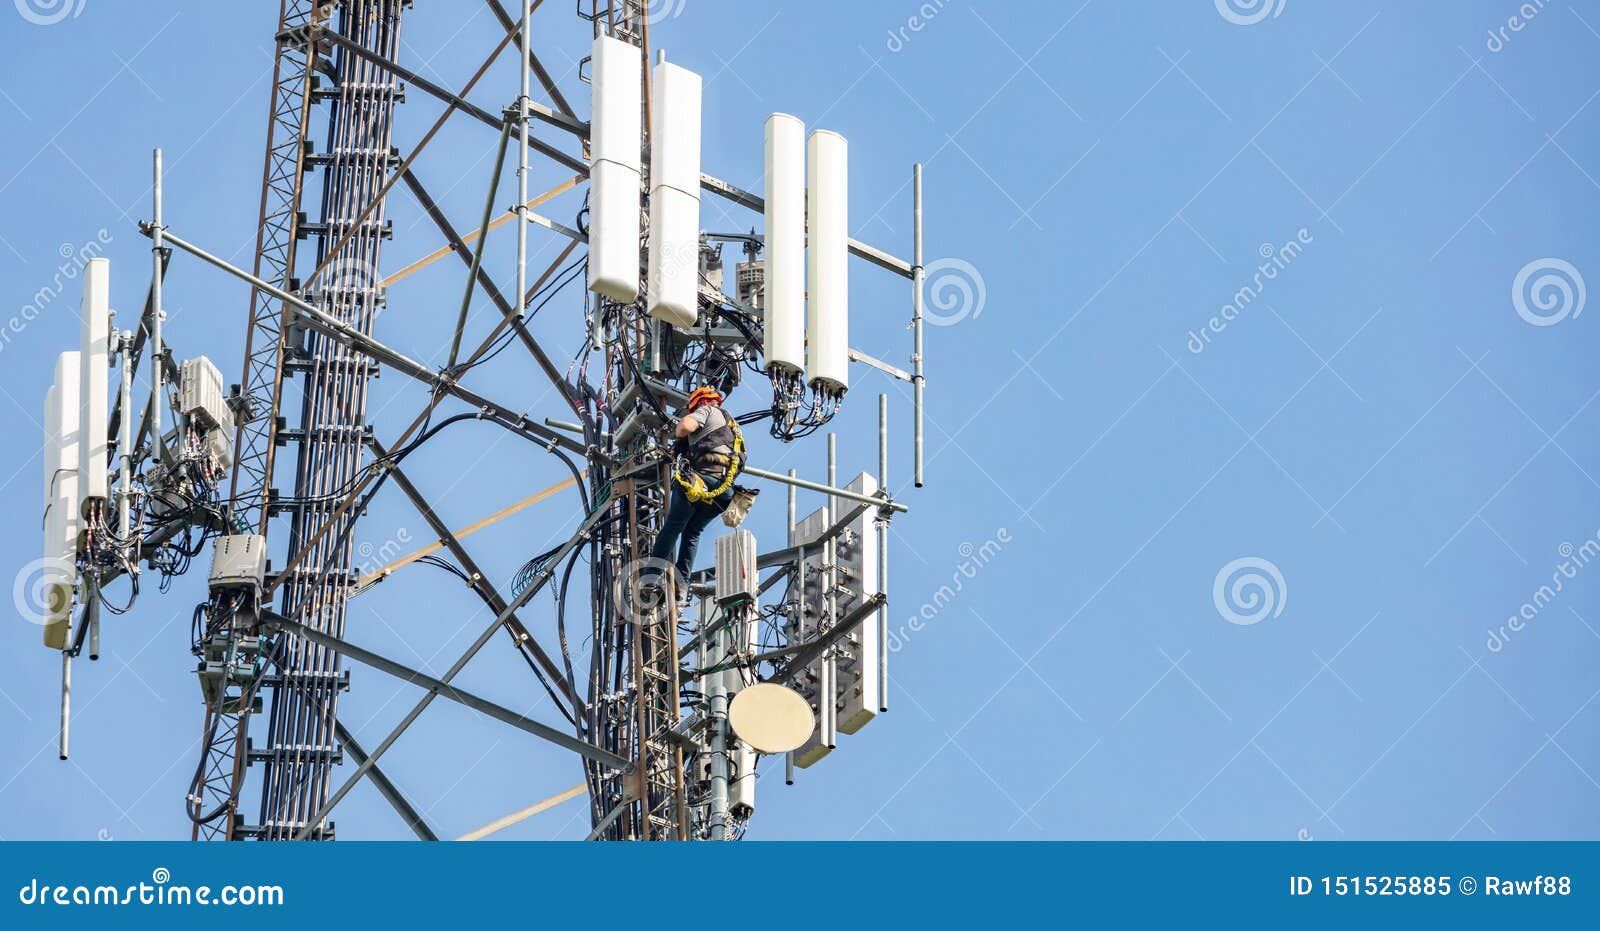 telecom maintenance. two repair men climbing on tower against blue sky background